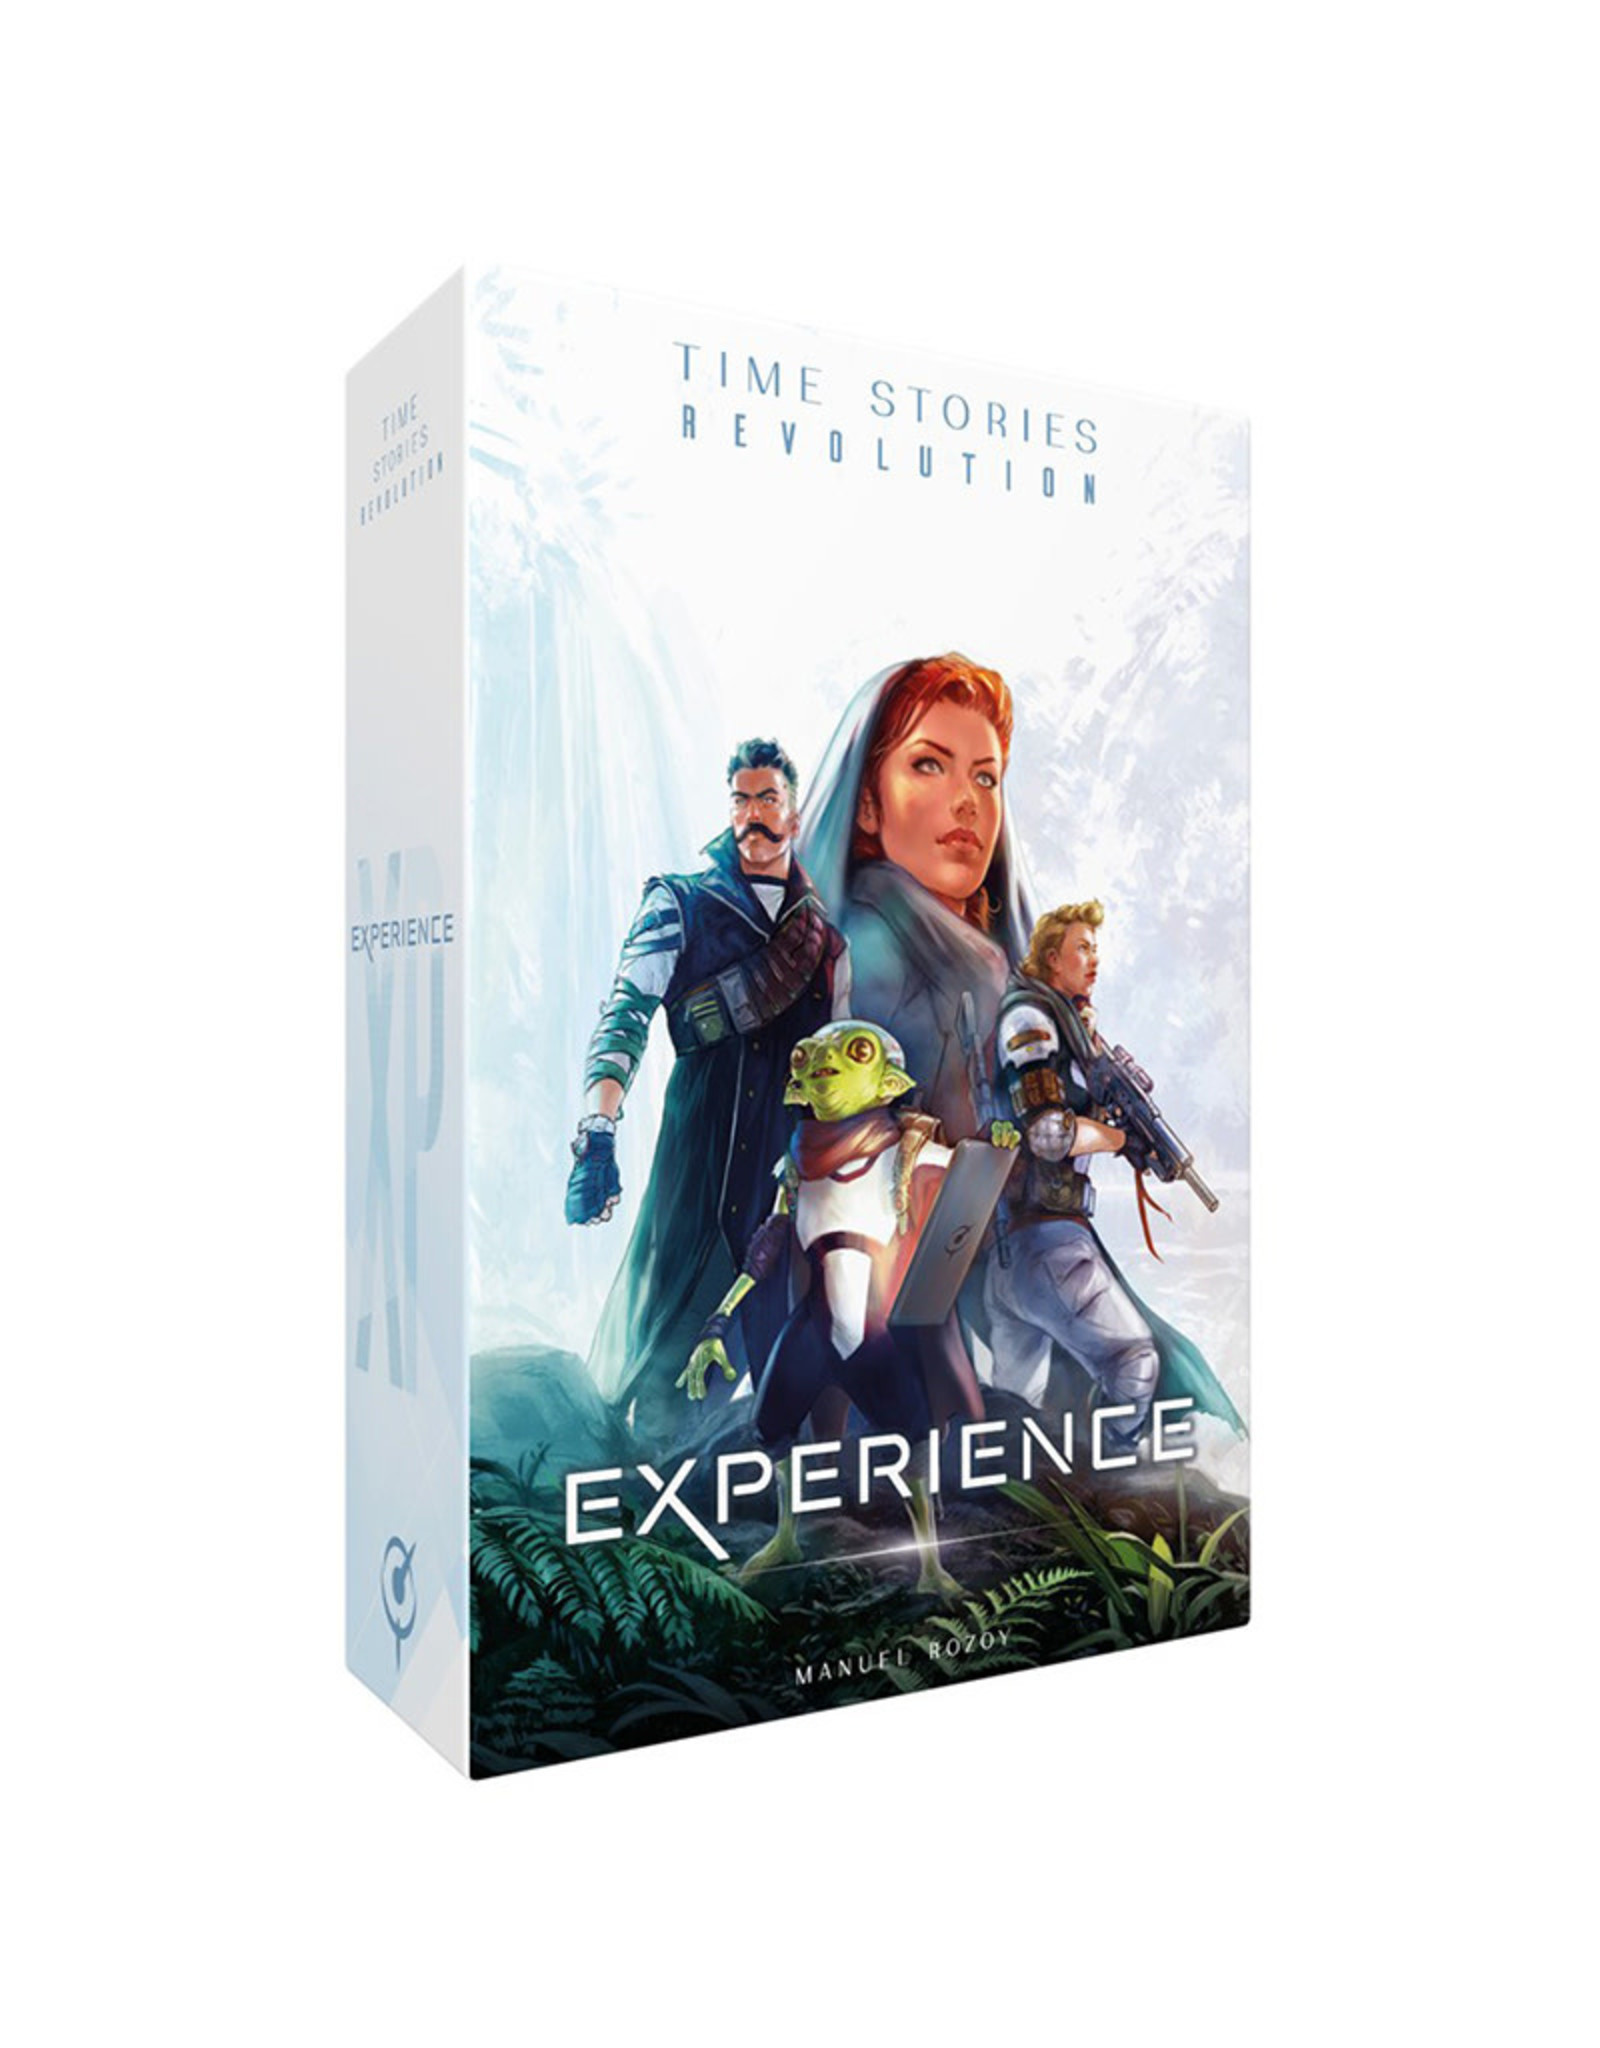 Time Stories Revolution Experience Game Night Games